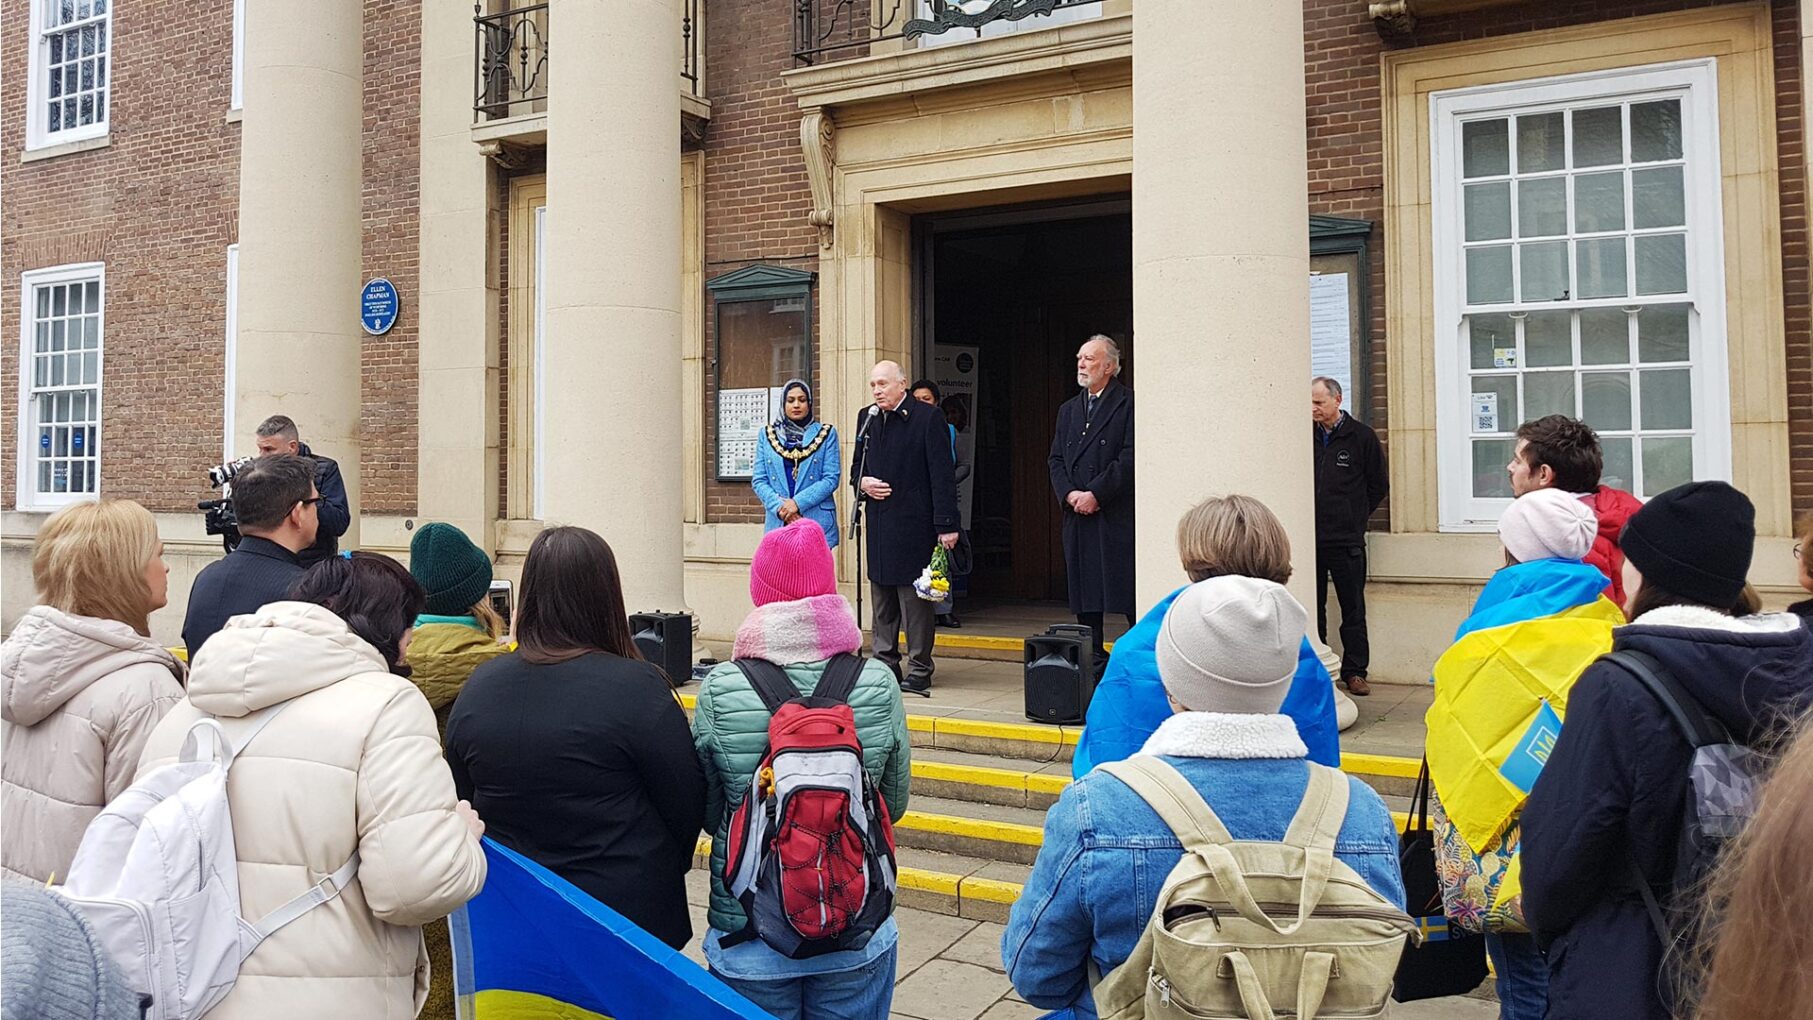 Minute’s Silence at Worthing Town Hall